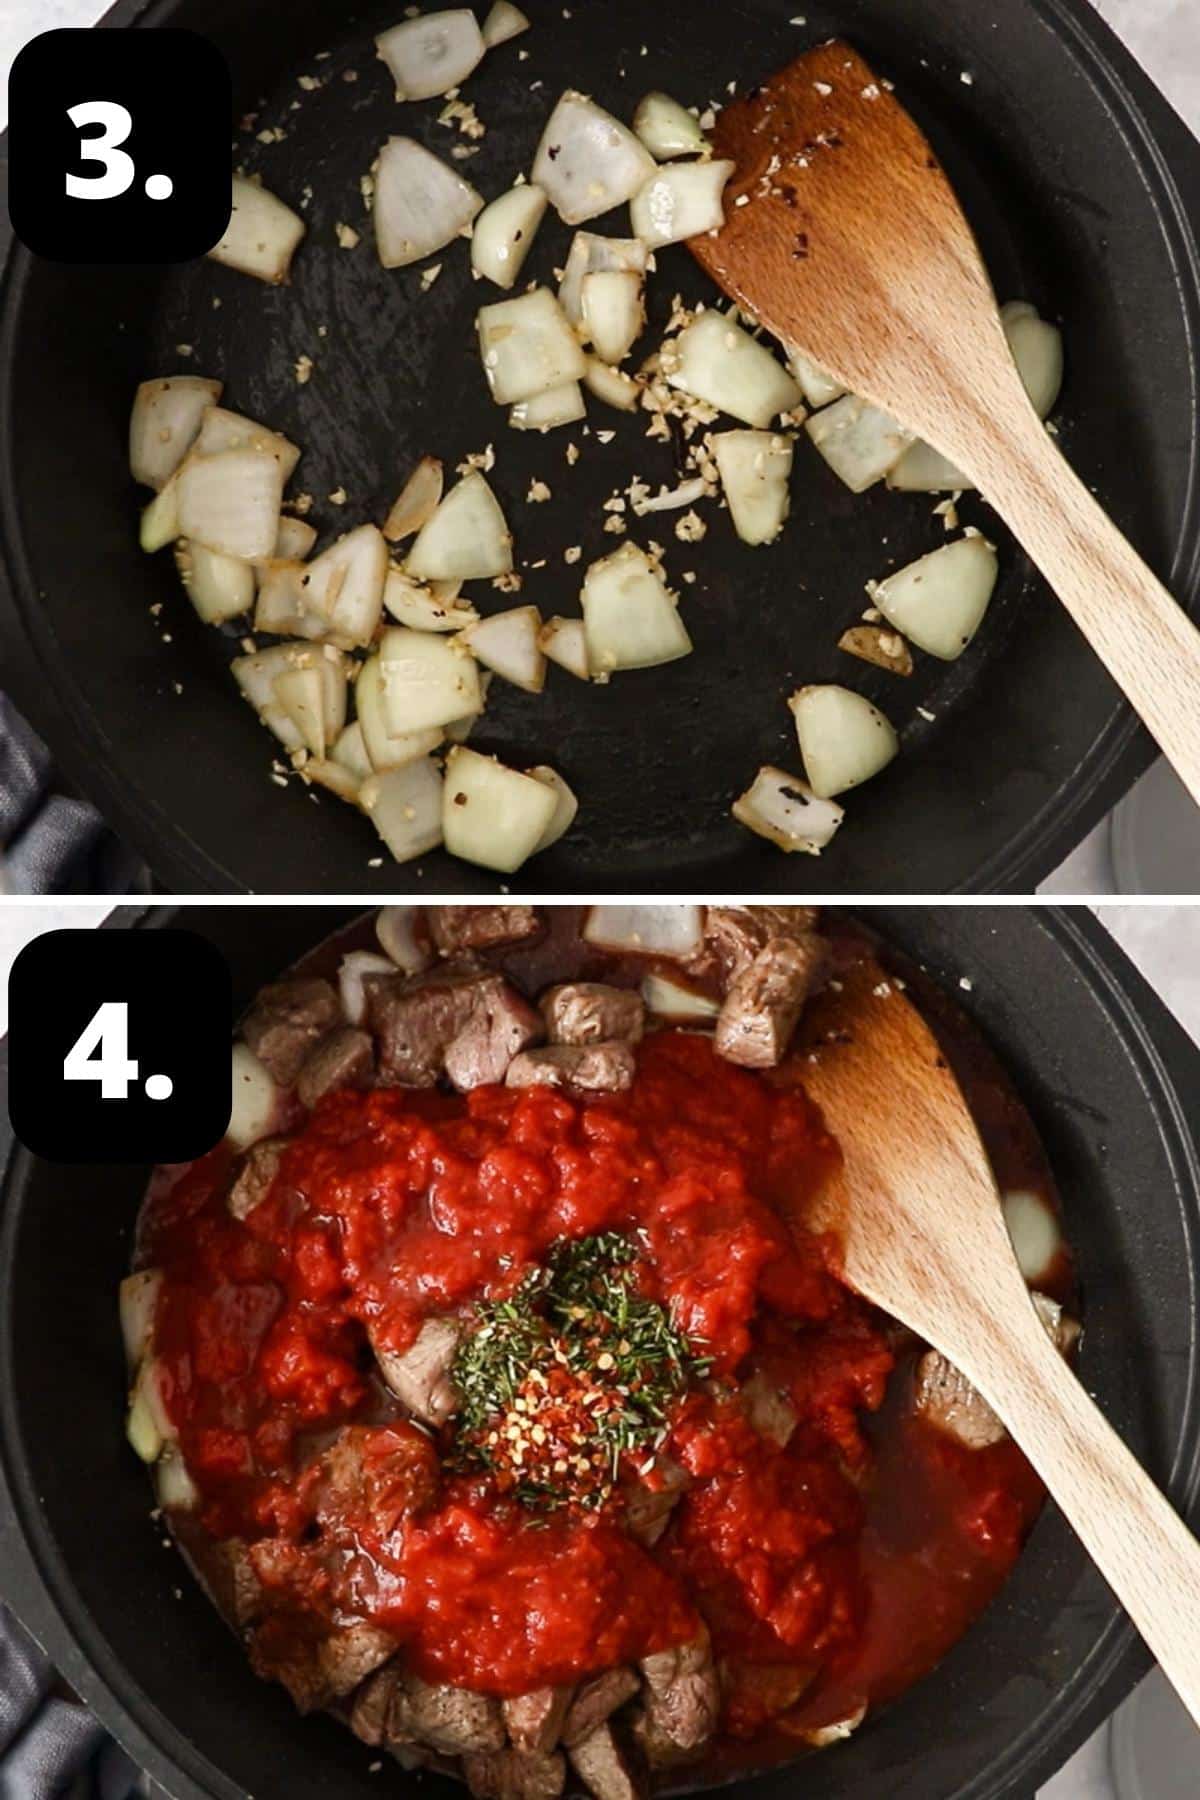 Steps 3-4 of preparing this recipe - cooking the onion and adding the beef, tomatoes and herbs to the dish.